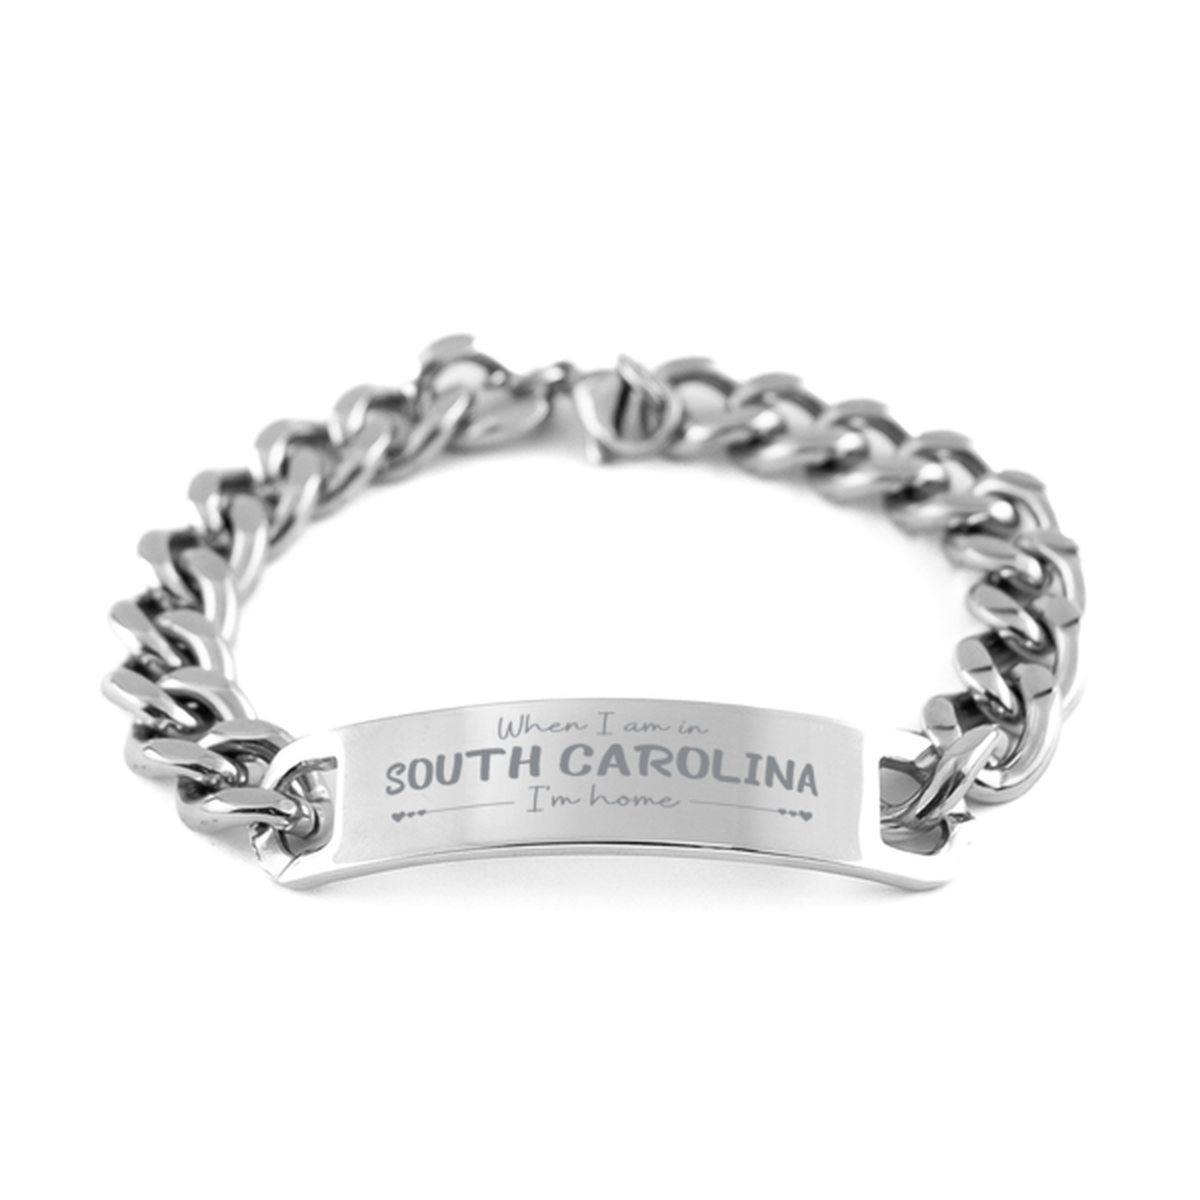 When I am in South Carolina I'm home Cuban Chain Stainless Steel Bracelet, Cheap Gifts For South Carolina, State South Carolina Birthday Gifts for Friends Coworker